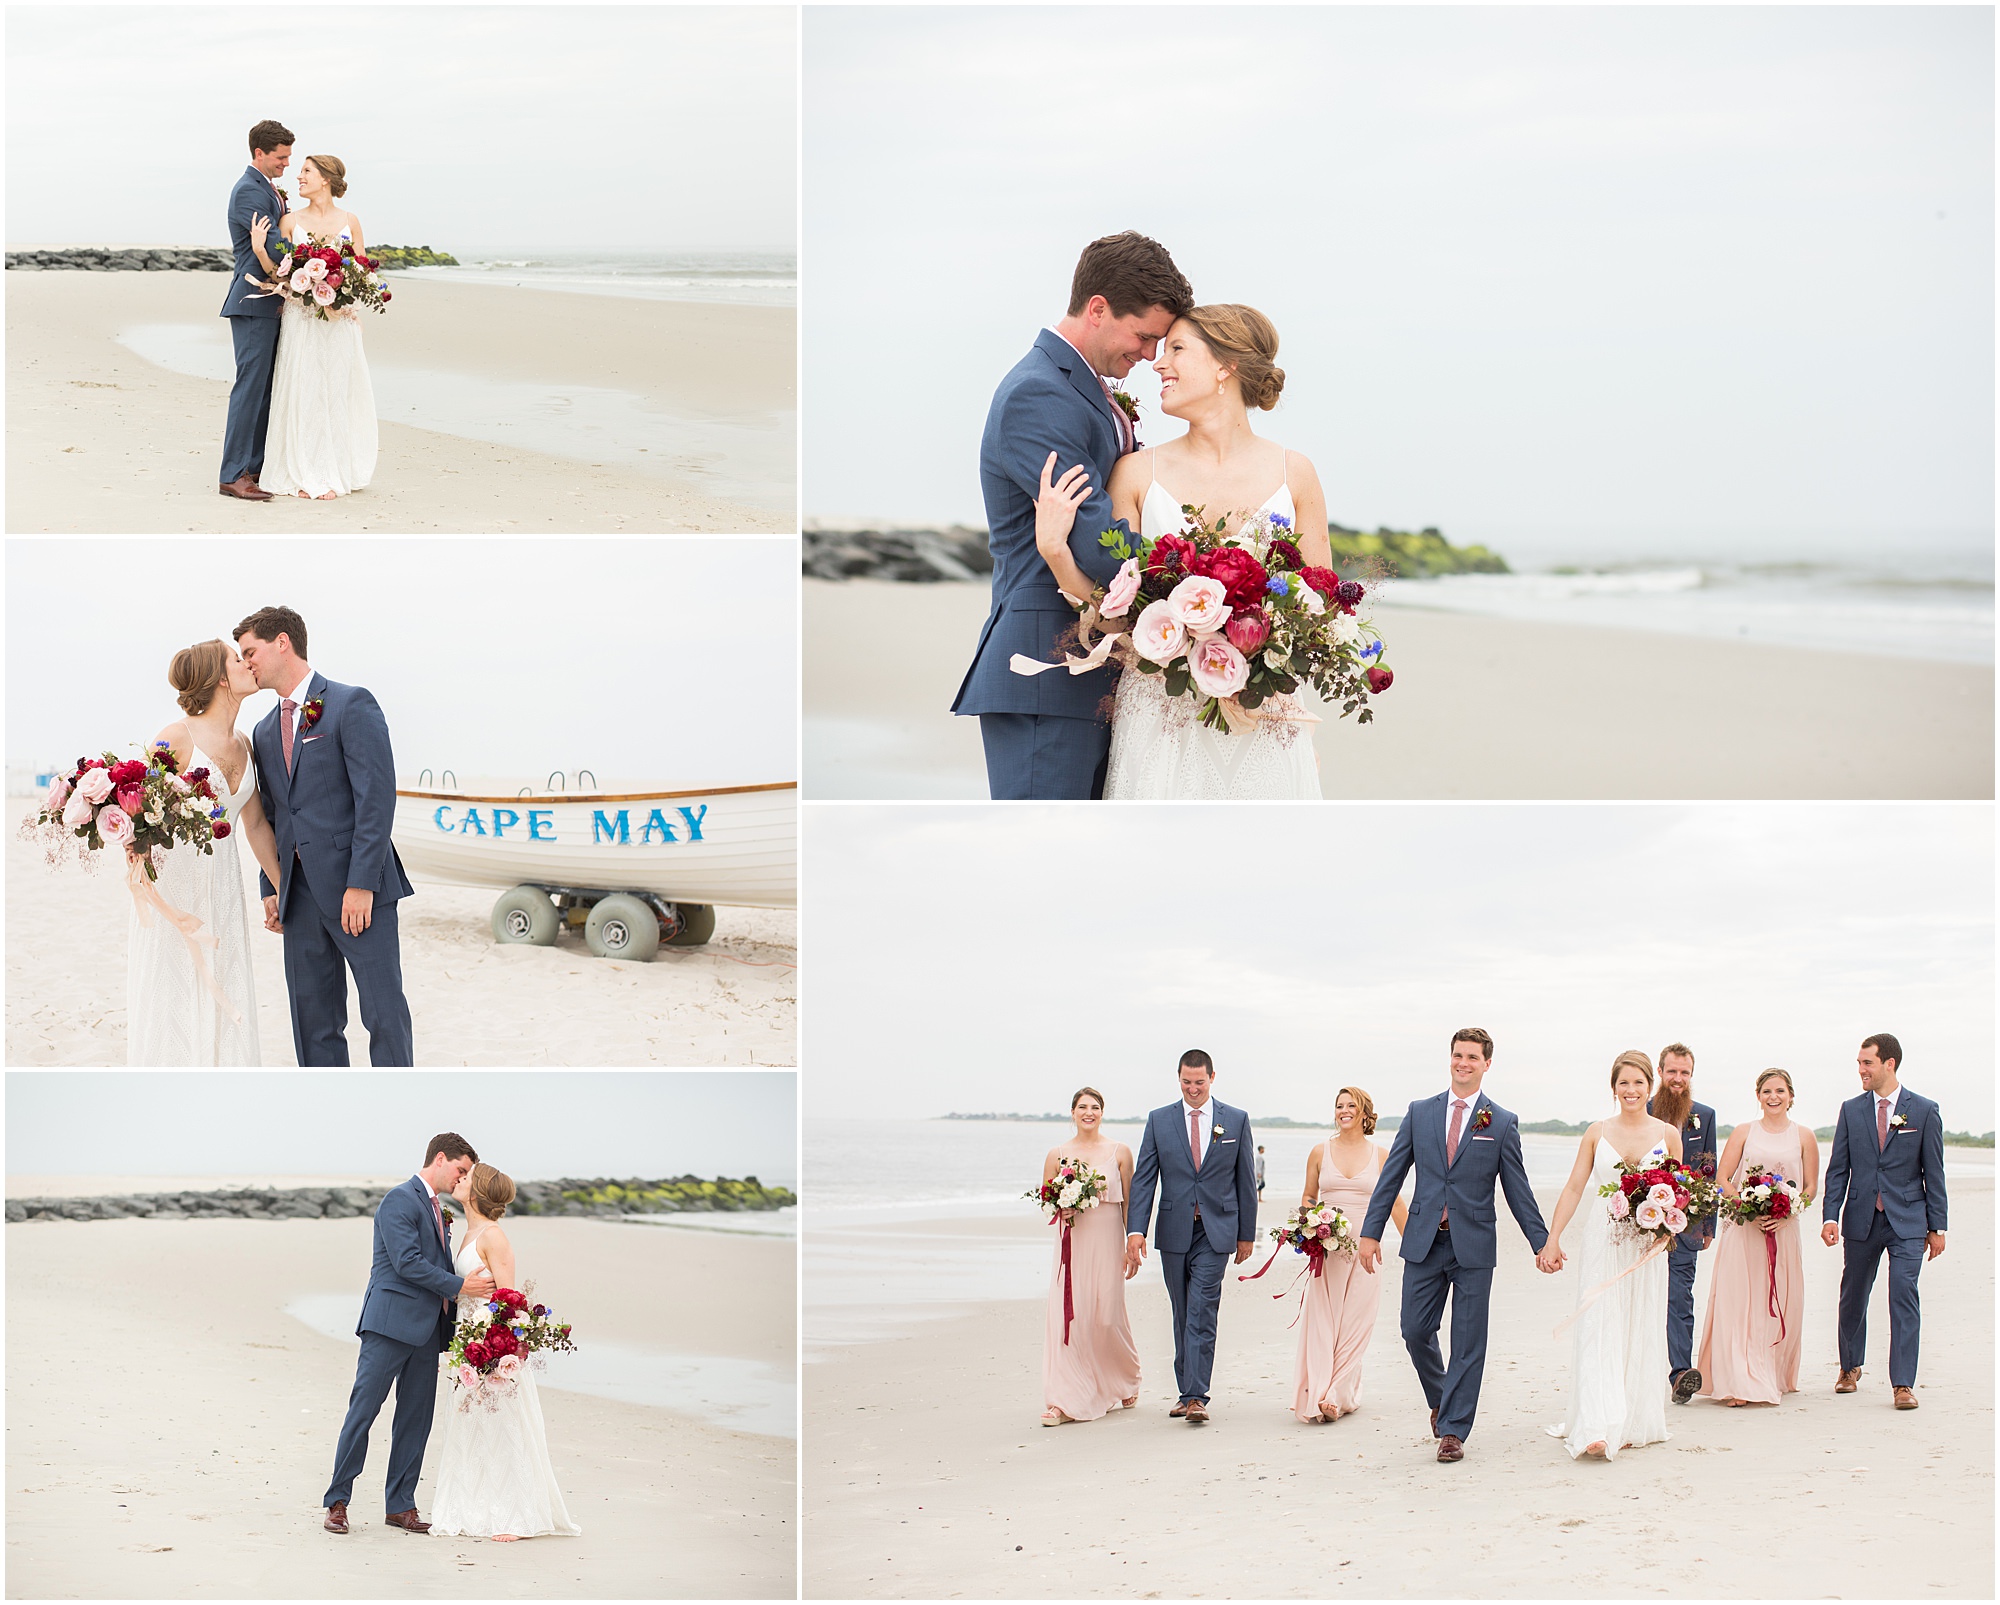 Best Locations for Cape May Wedding Photos: Cove Beach